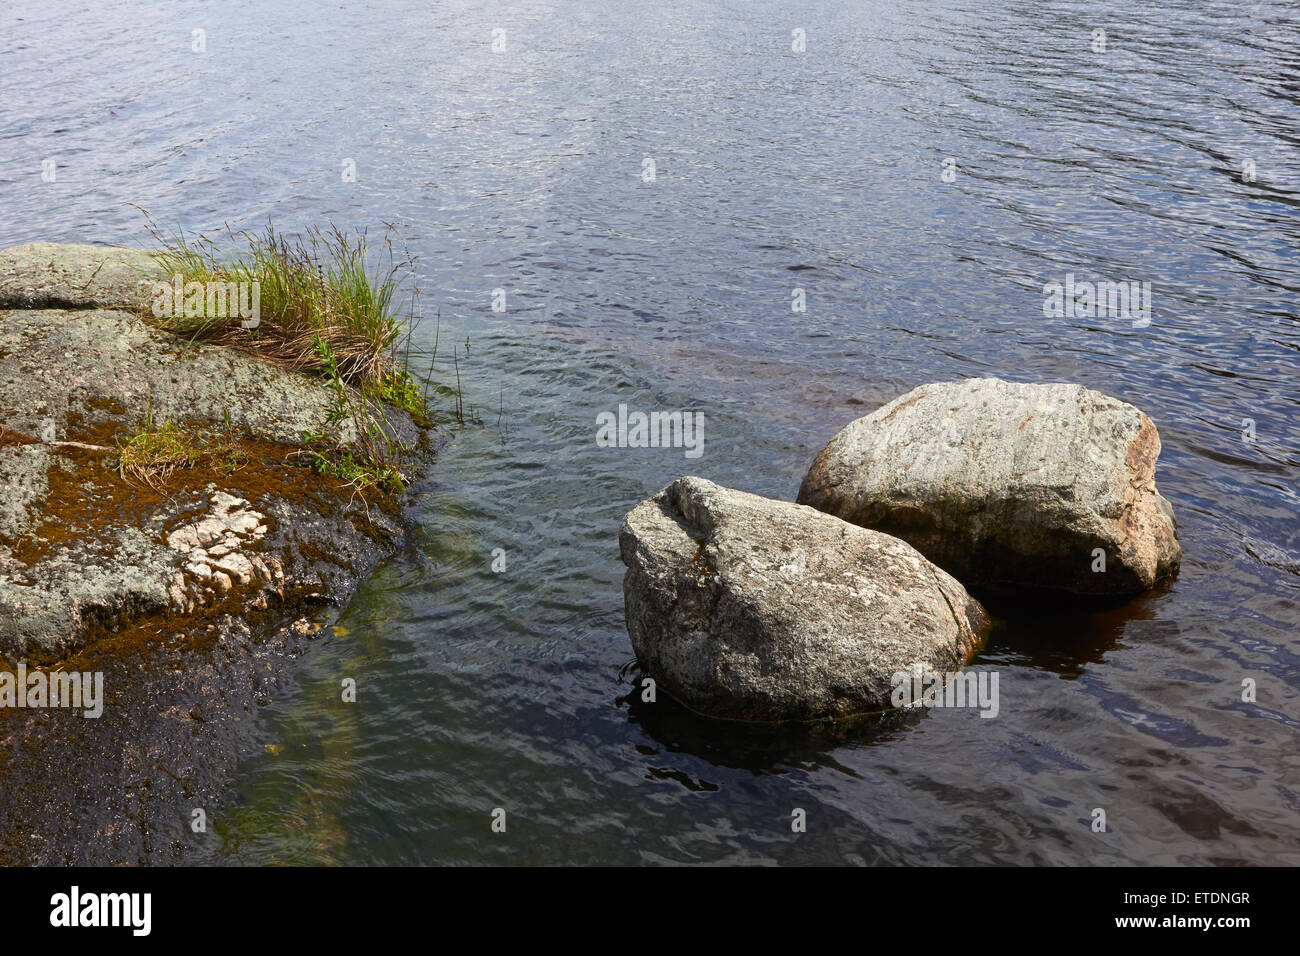 boulders peeking out of water, Finland Stock Photo